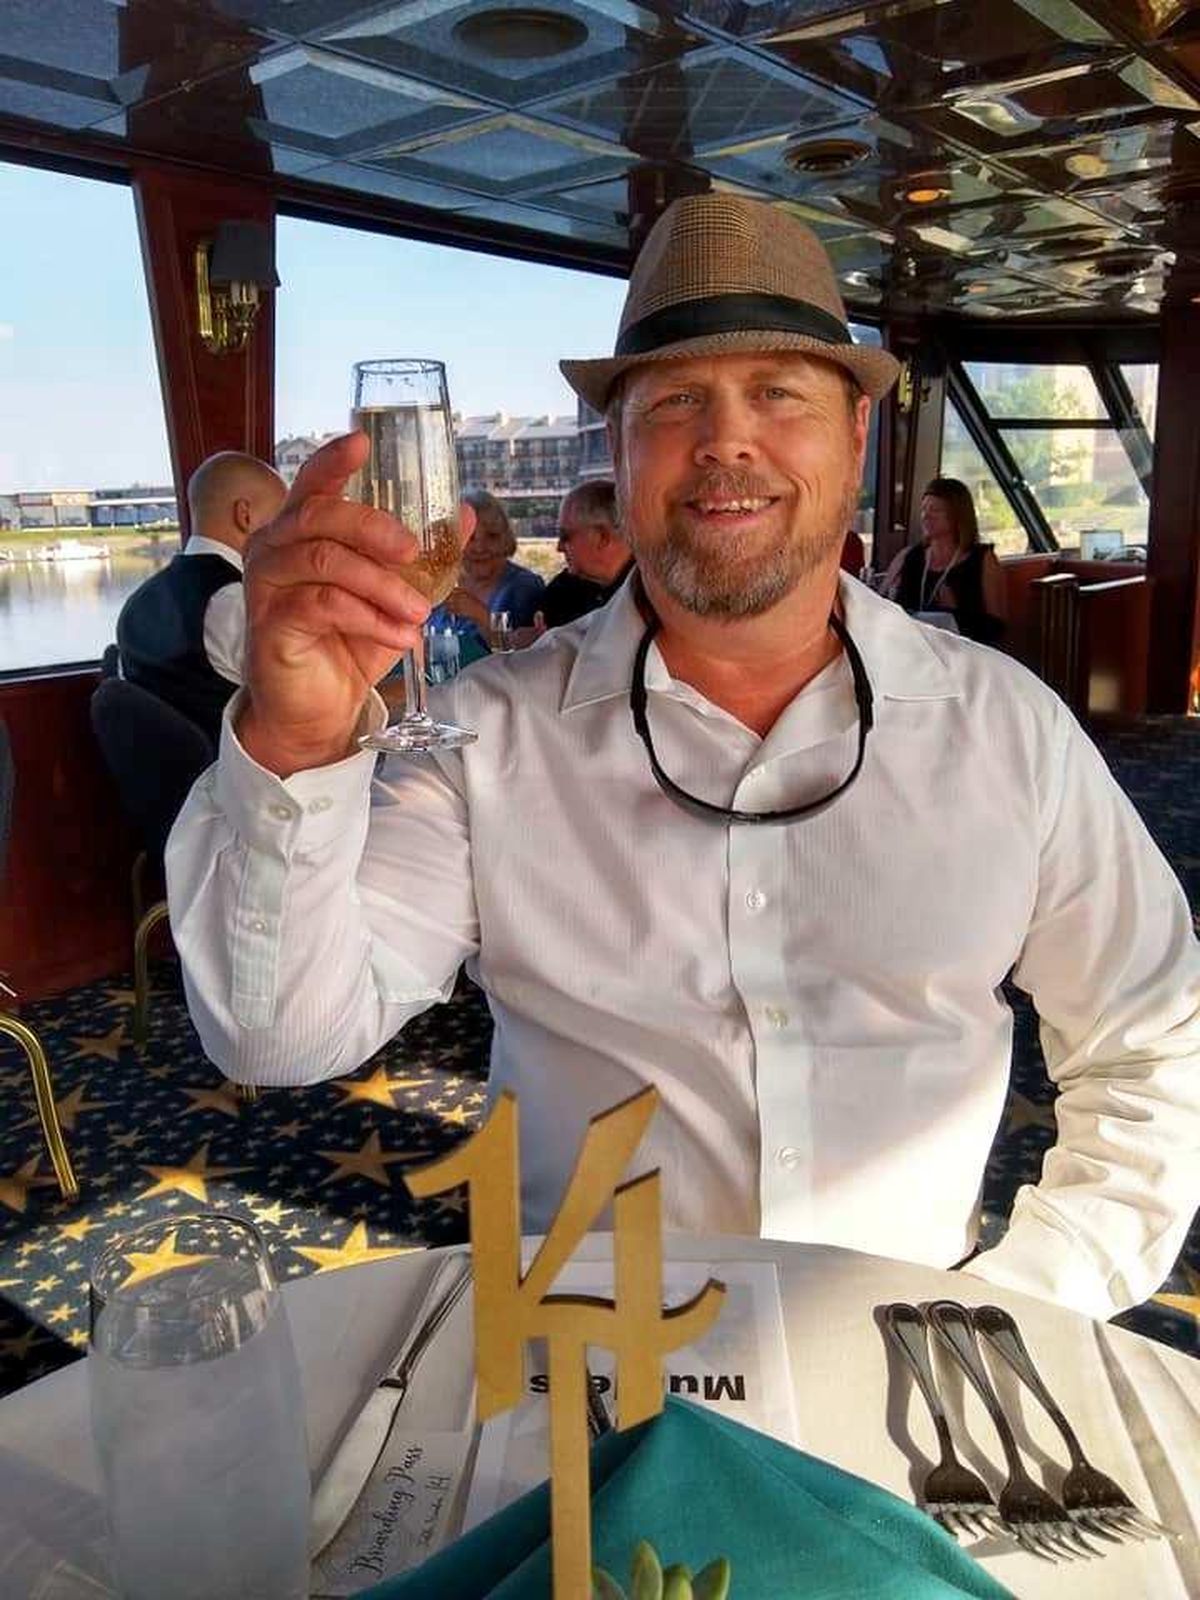 Derek Hval toasts champagne before mayhem erupts in a murder mystery cruise on the Columbia River. (Cindy Hval / The Spokesman-Review)